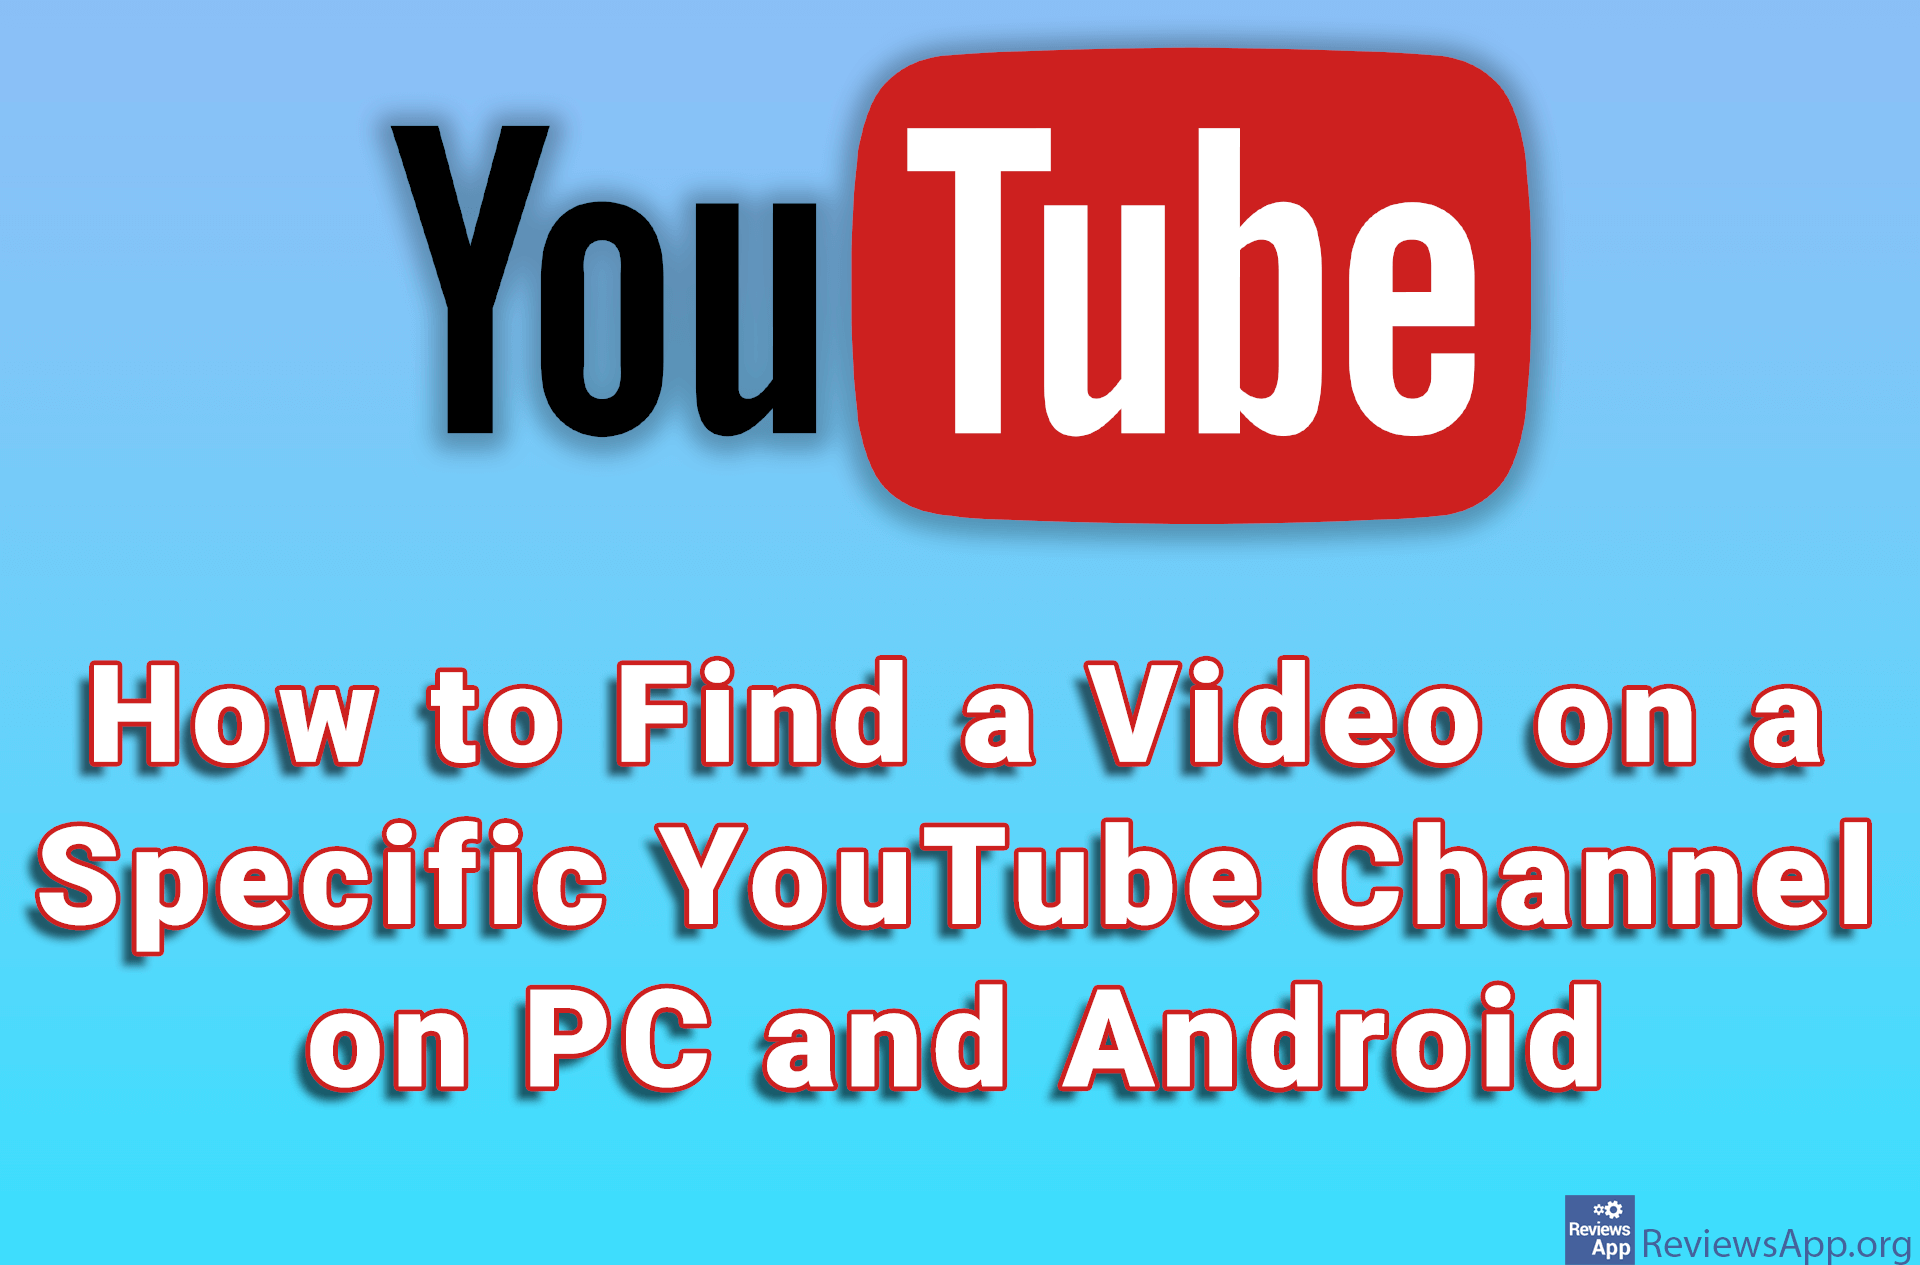 How to Find a Video on a Specific YouTube Channel on PC and Android